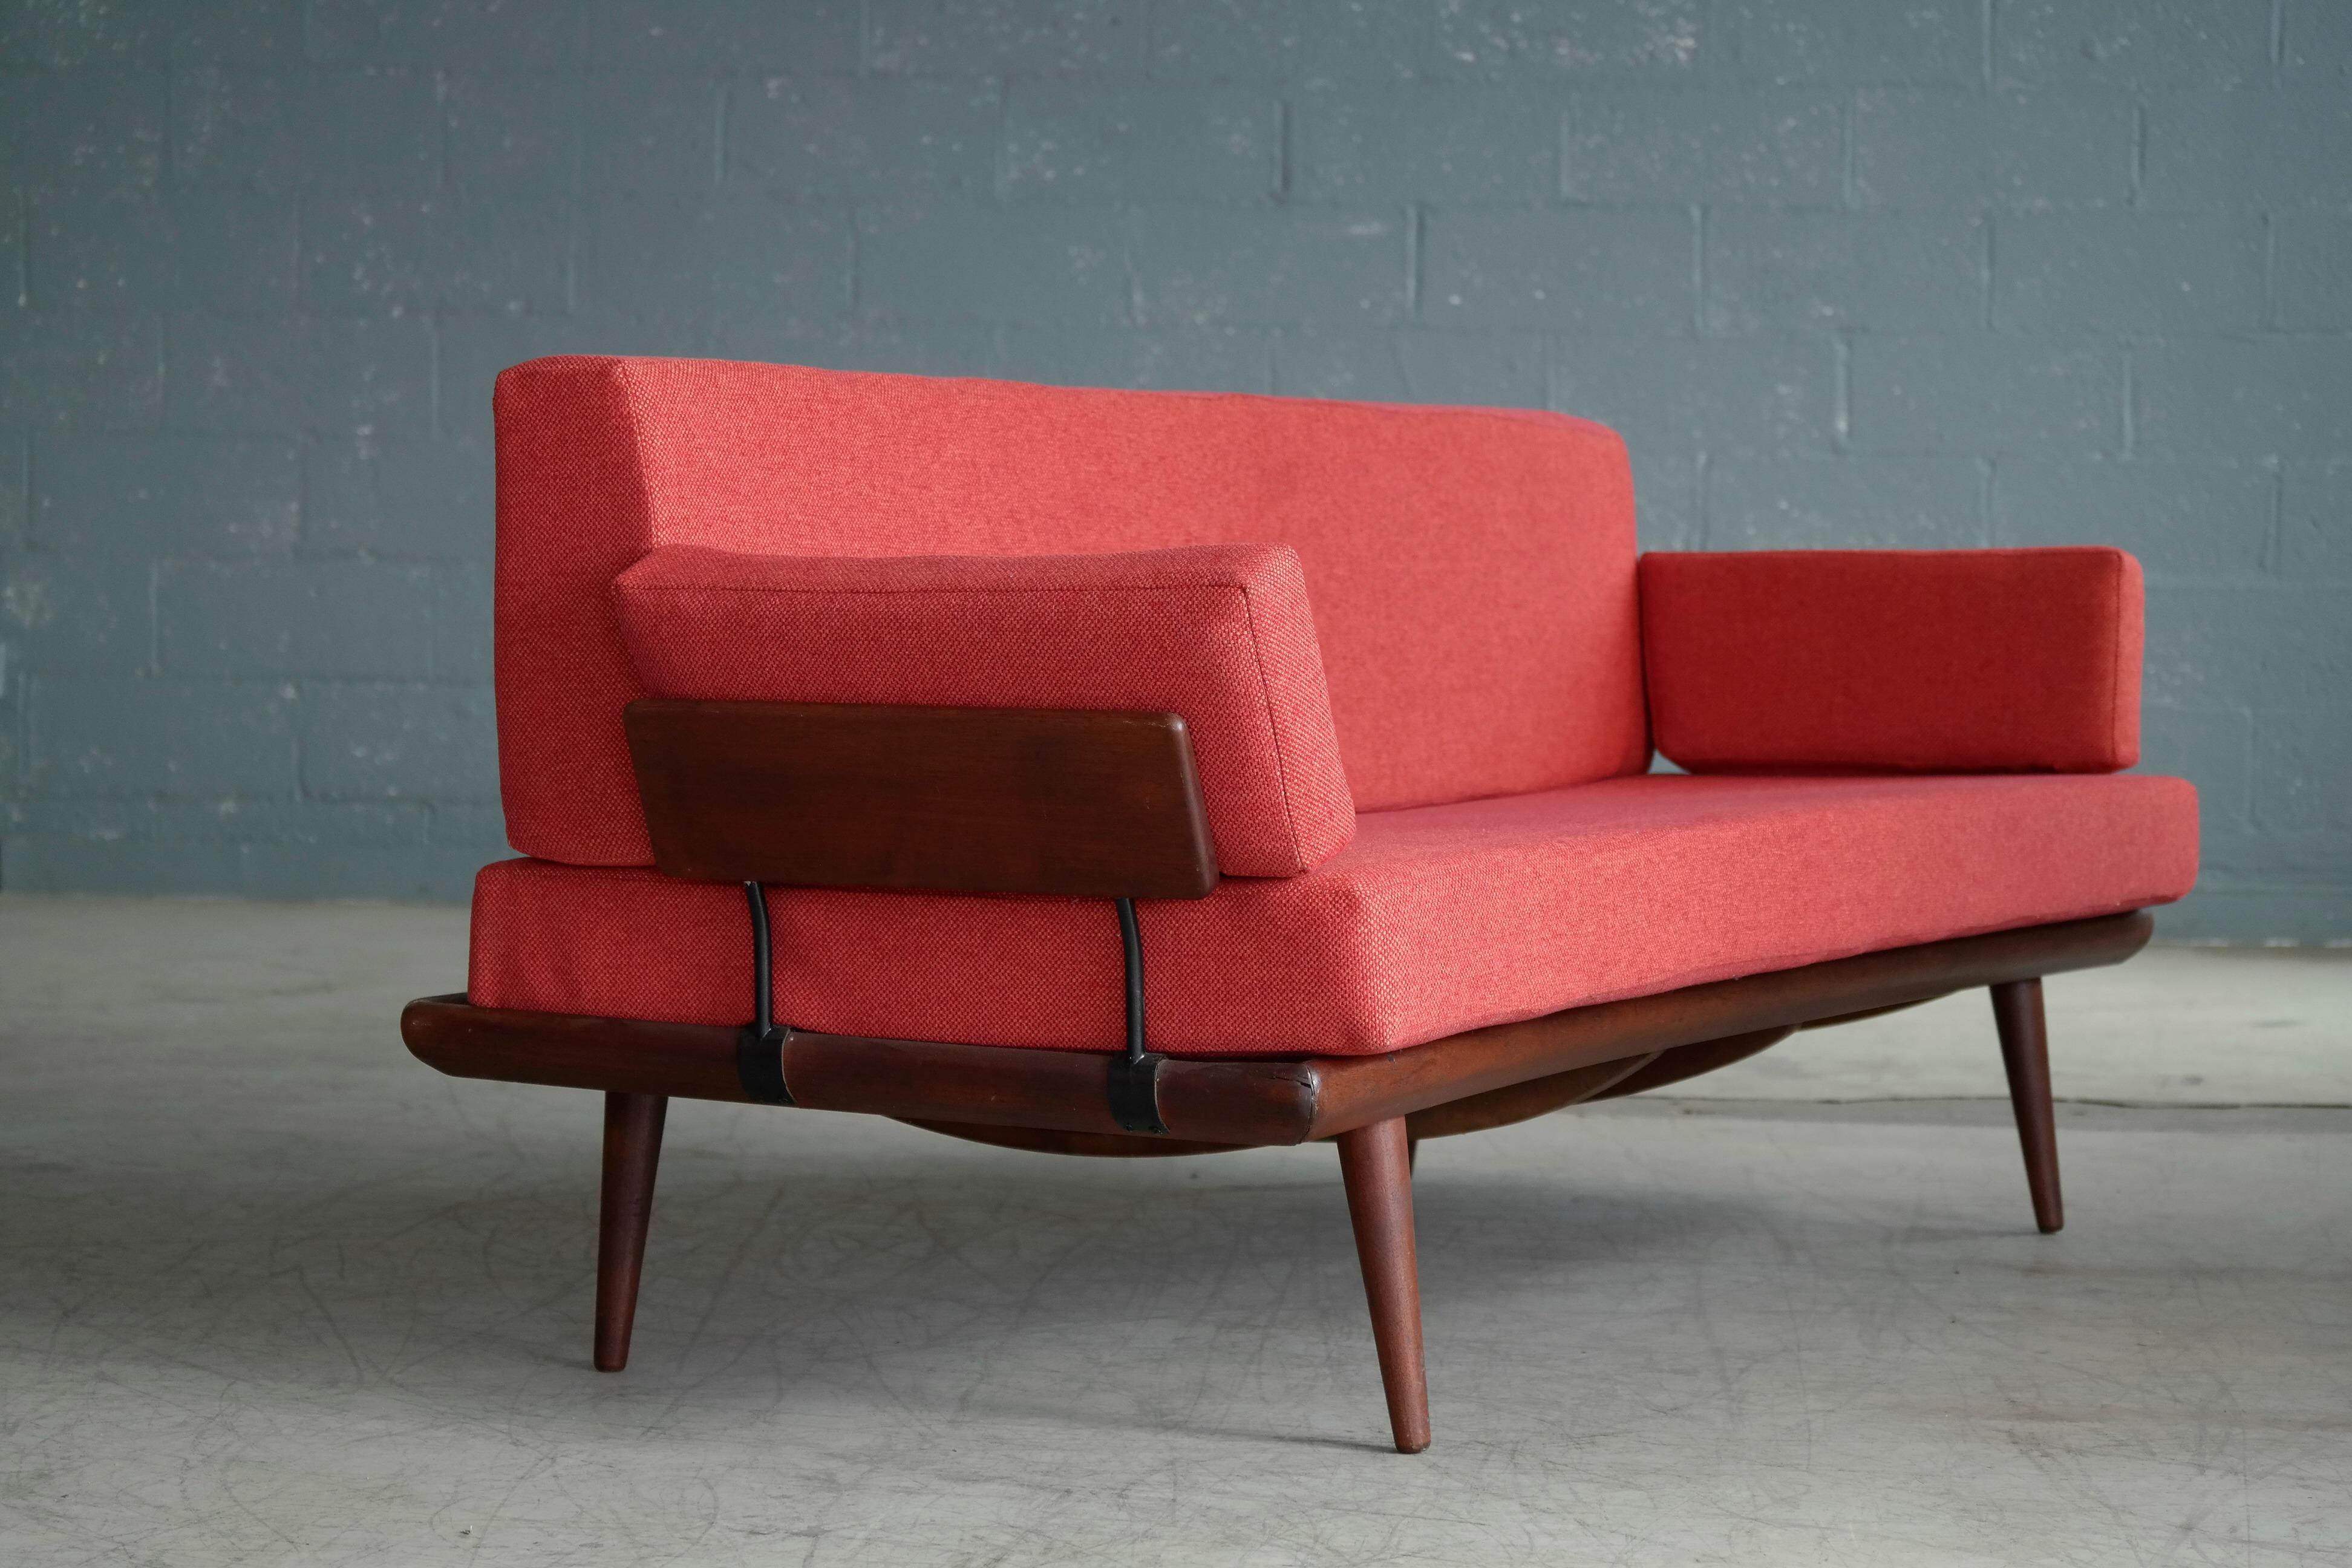 A model Minerva sofa/daybed one of the most Classic and sought after Danish sofas from the famous design duo of Peter Hvidt and Orla Mølgaard-Nielsen for France and Son. New foam and new upholstery in a nice midcentury texture fabric that Stand in